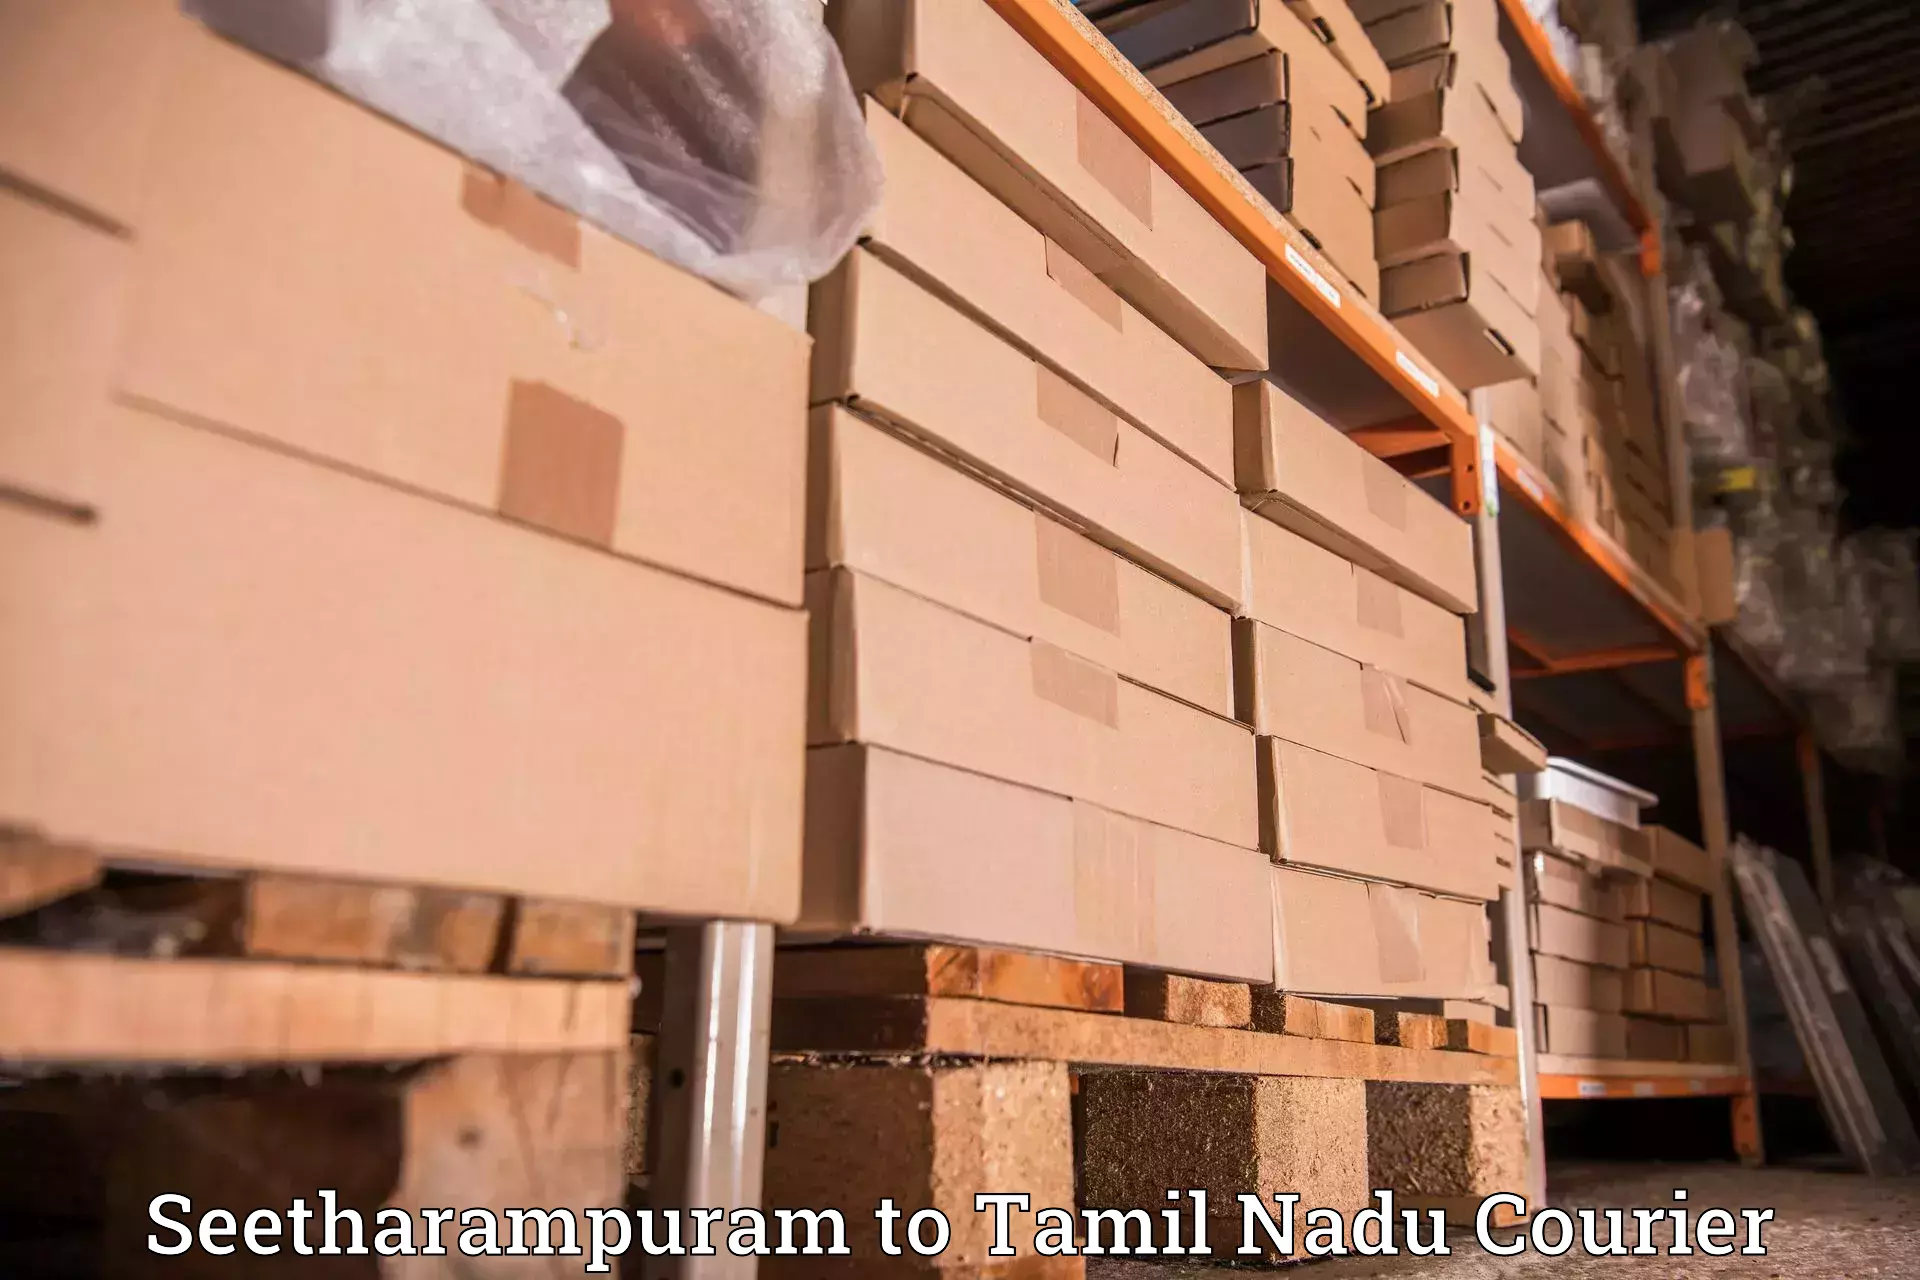 Next-day delivery options in Seetharampuram to Sirkali